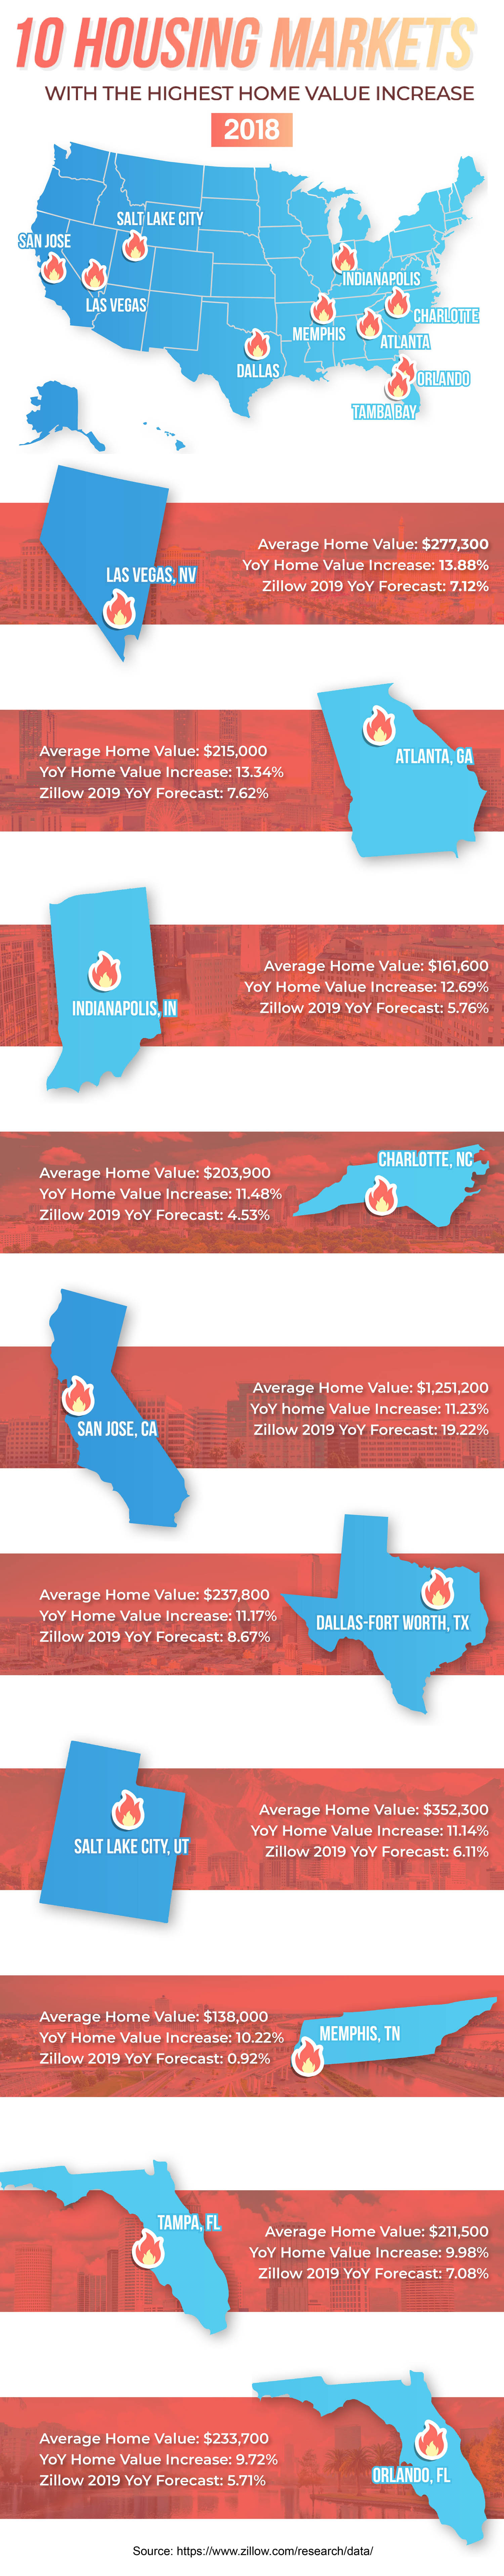 10 Housing Markets With The Highest Home Value Increase in 2018